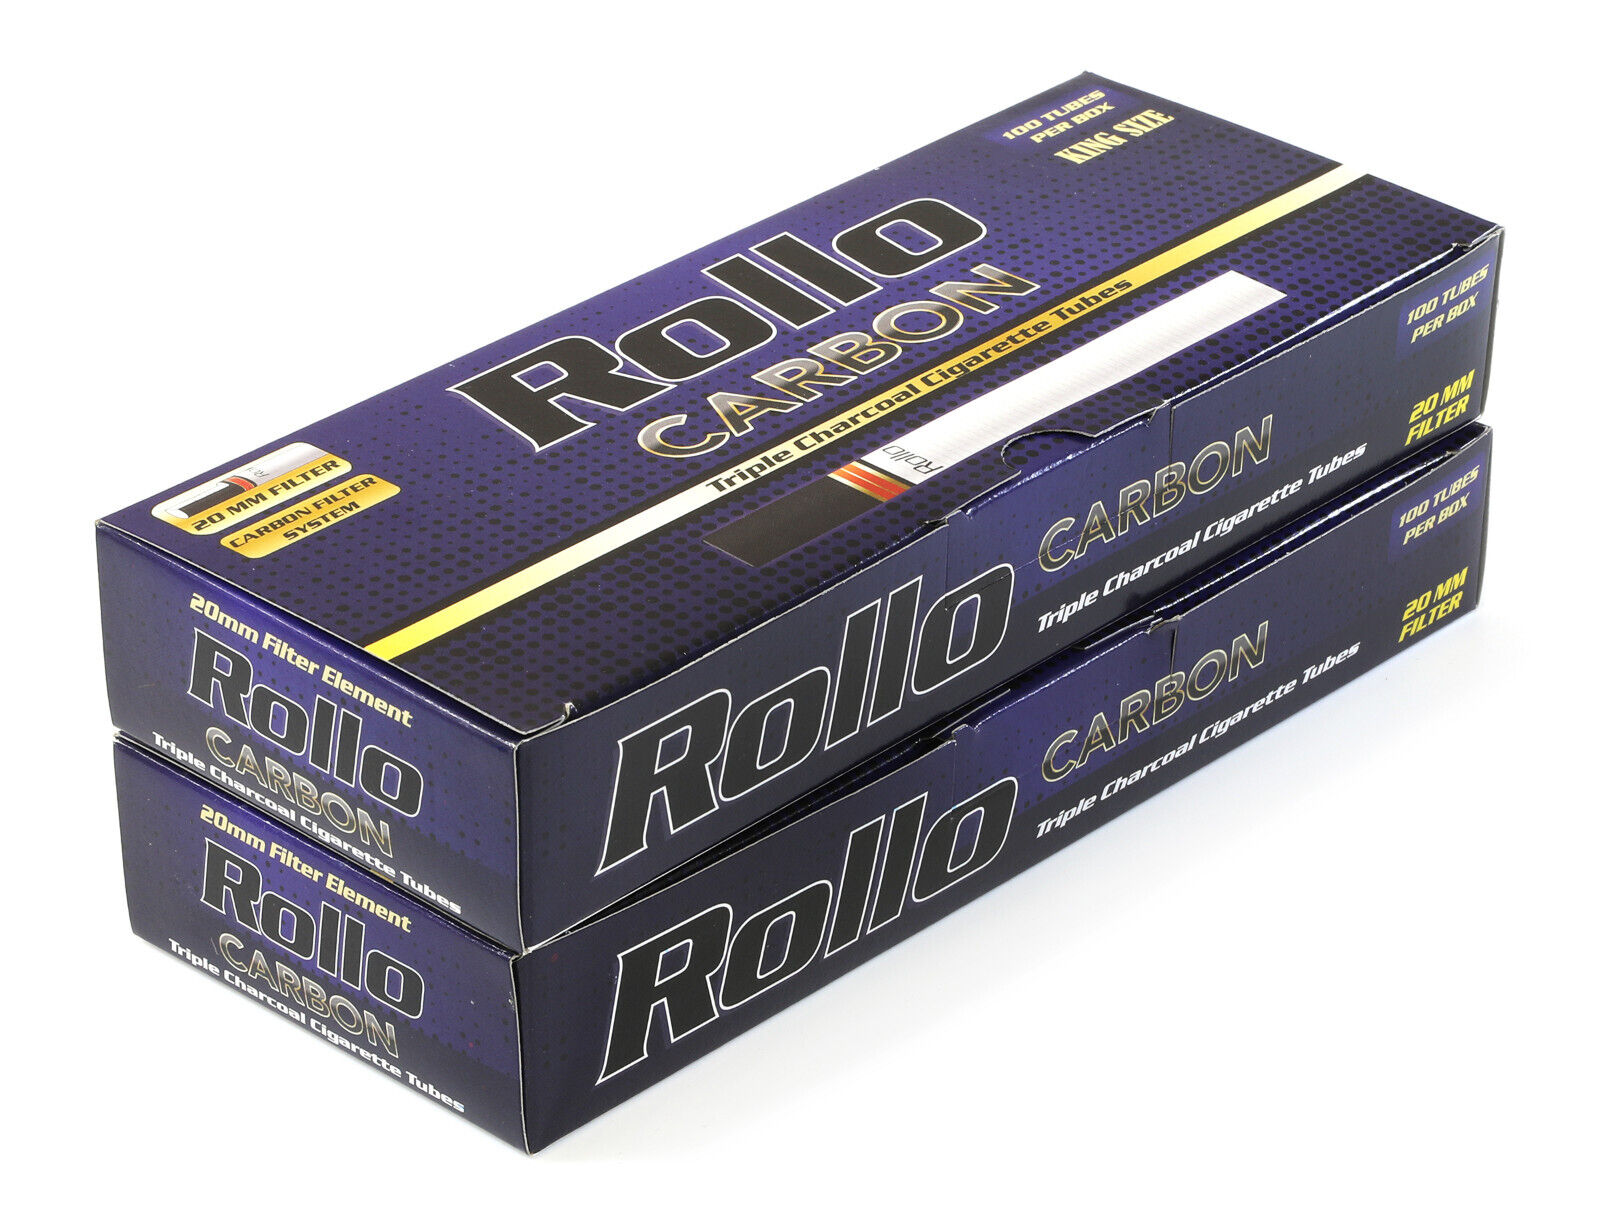 Rollo Triple Carbon Long filter 20mm tubes King Size 84mm - 2x100 or 1 x 200 pcs